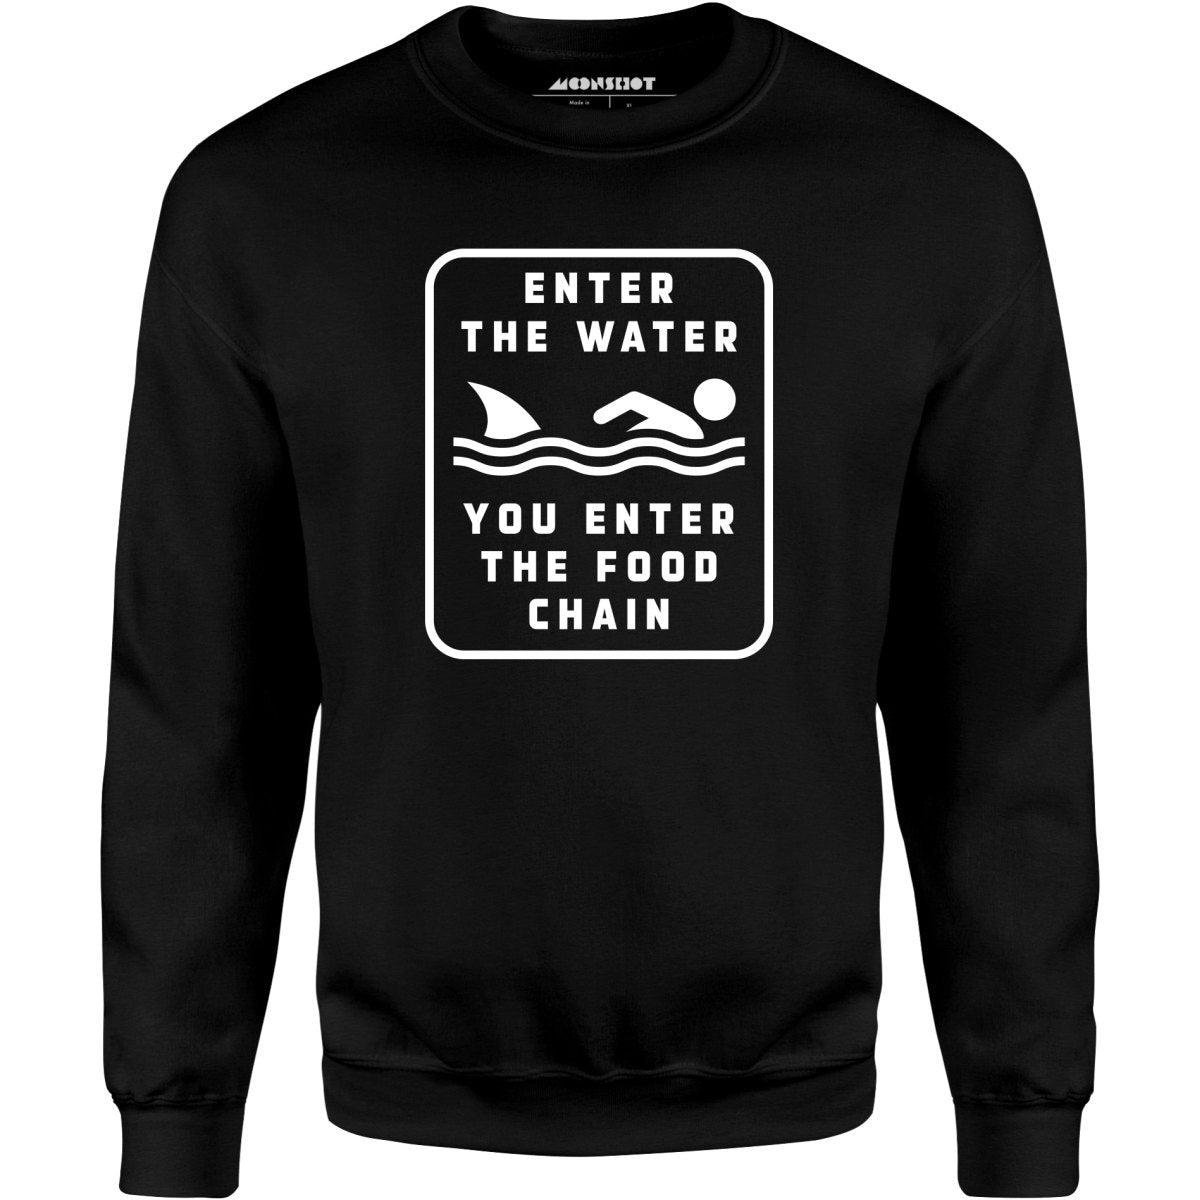 Enter the Water You Enter the Food Chain - Unisex Sweatshirt